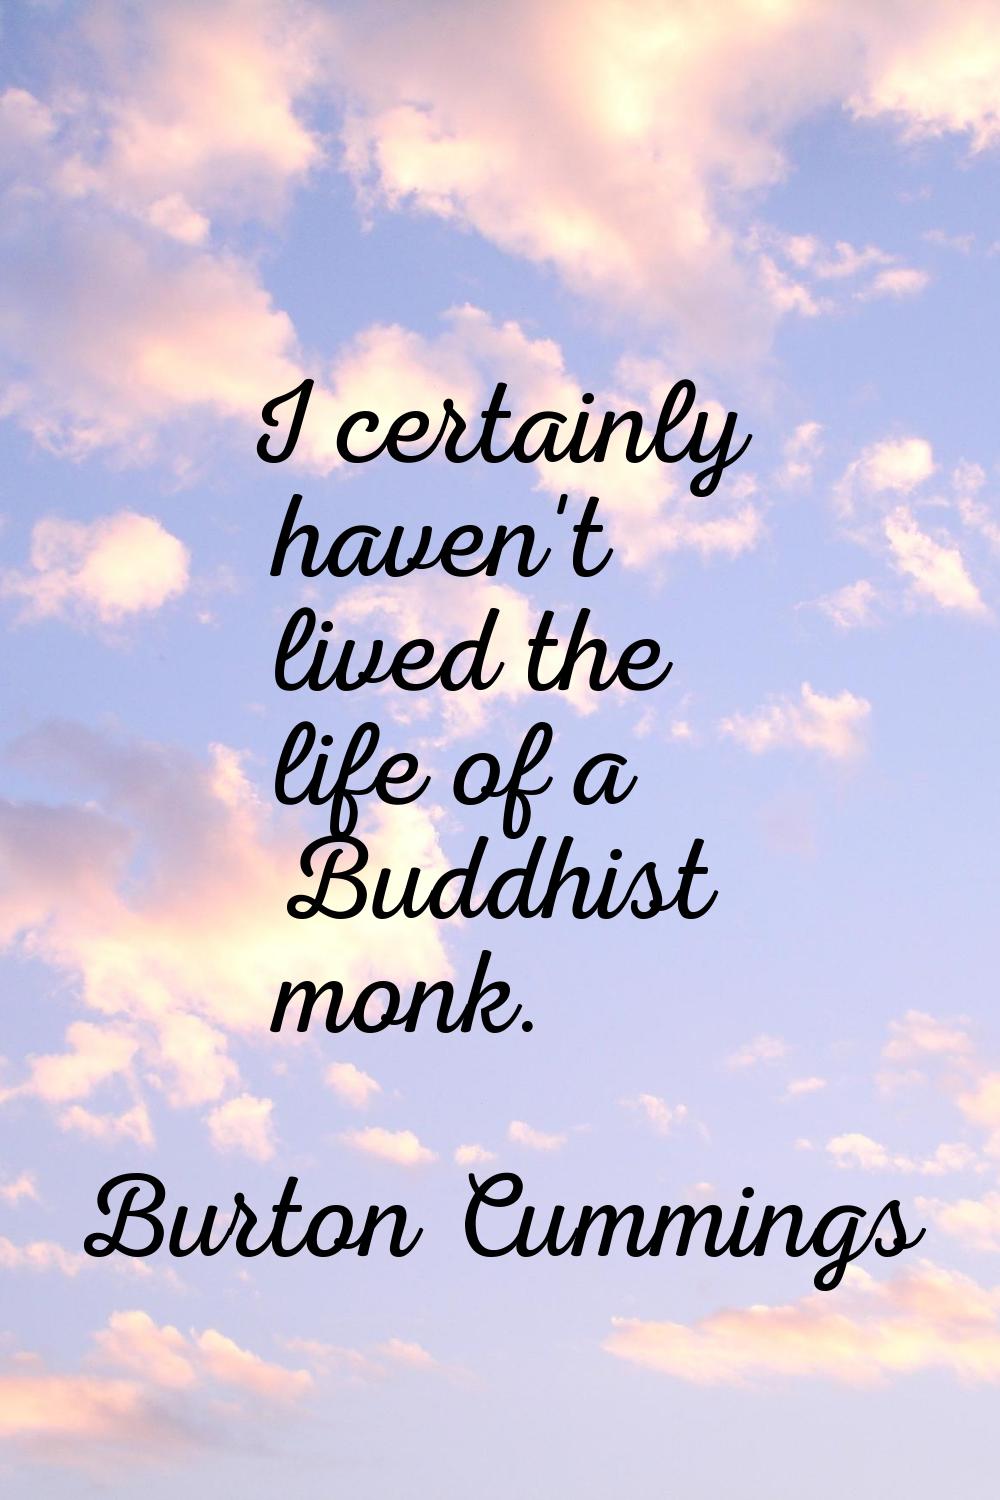 I certainly haven't lived the life of a Buddhist monk.